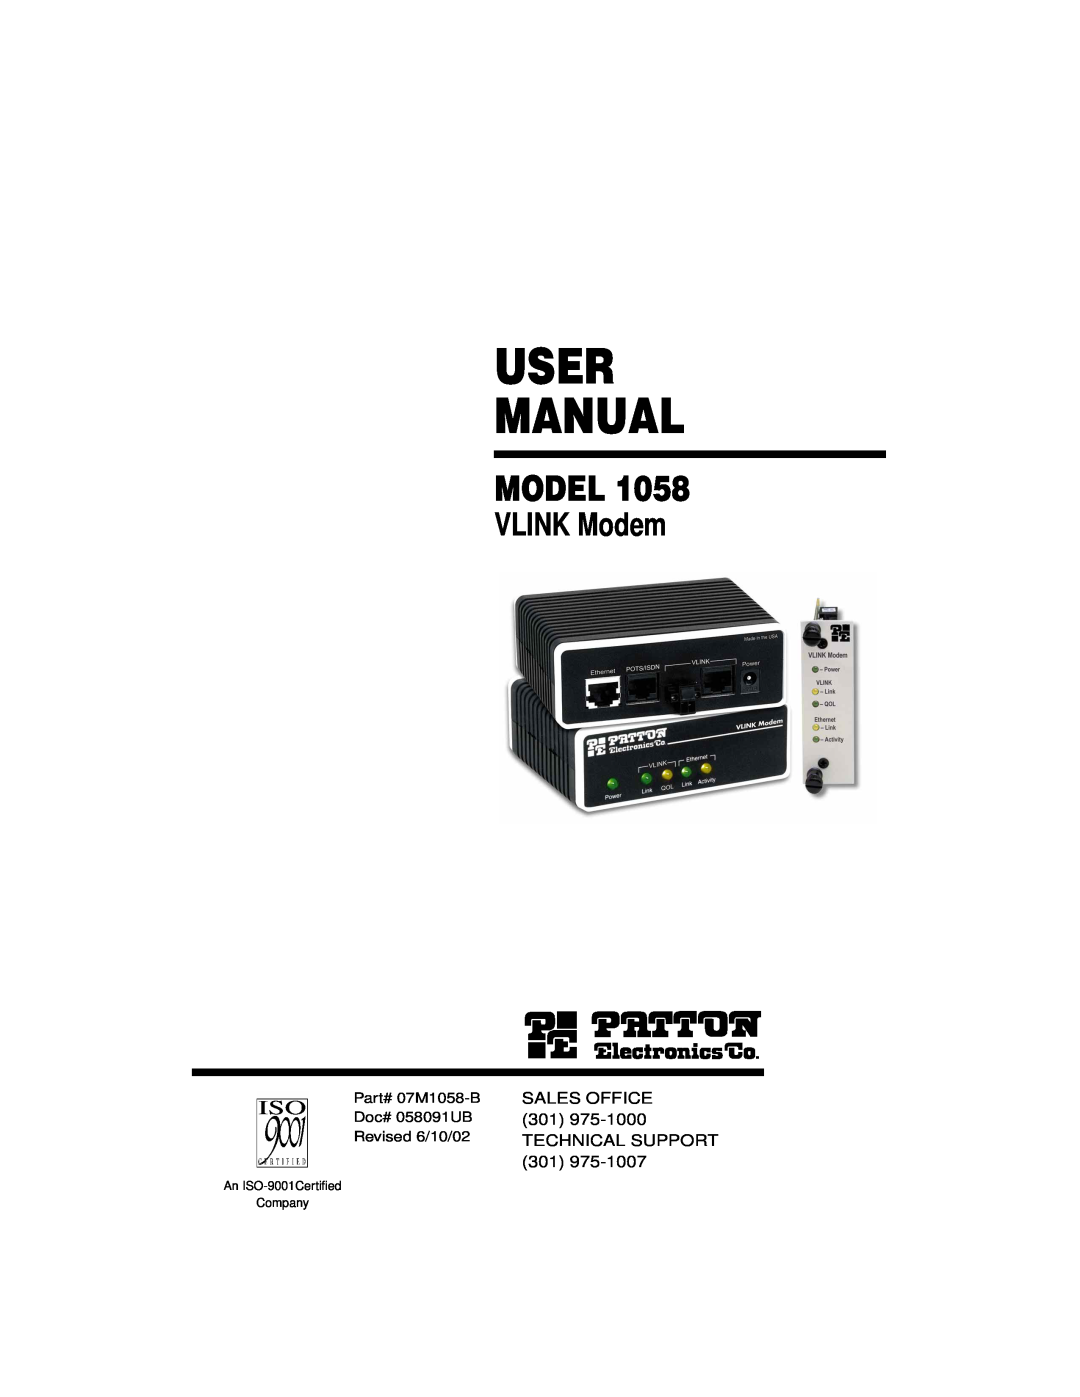 Patton electronic user manual User Manual, VLINK MODEM Model 1058, An ISO-9001Certiﬁed Company 